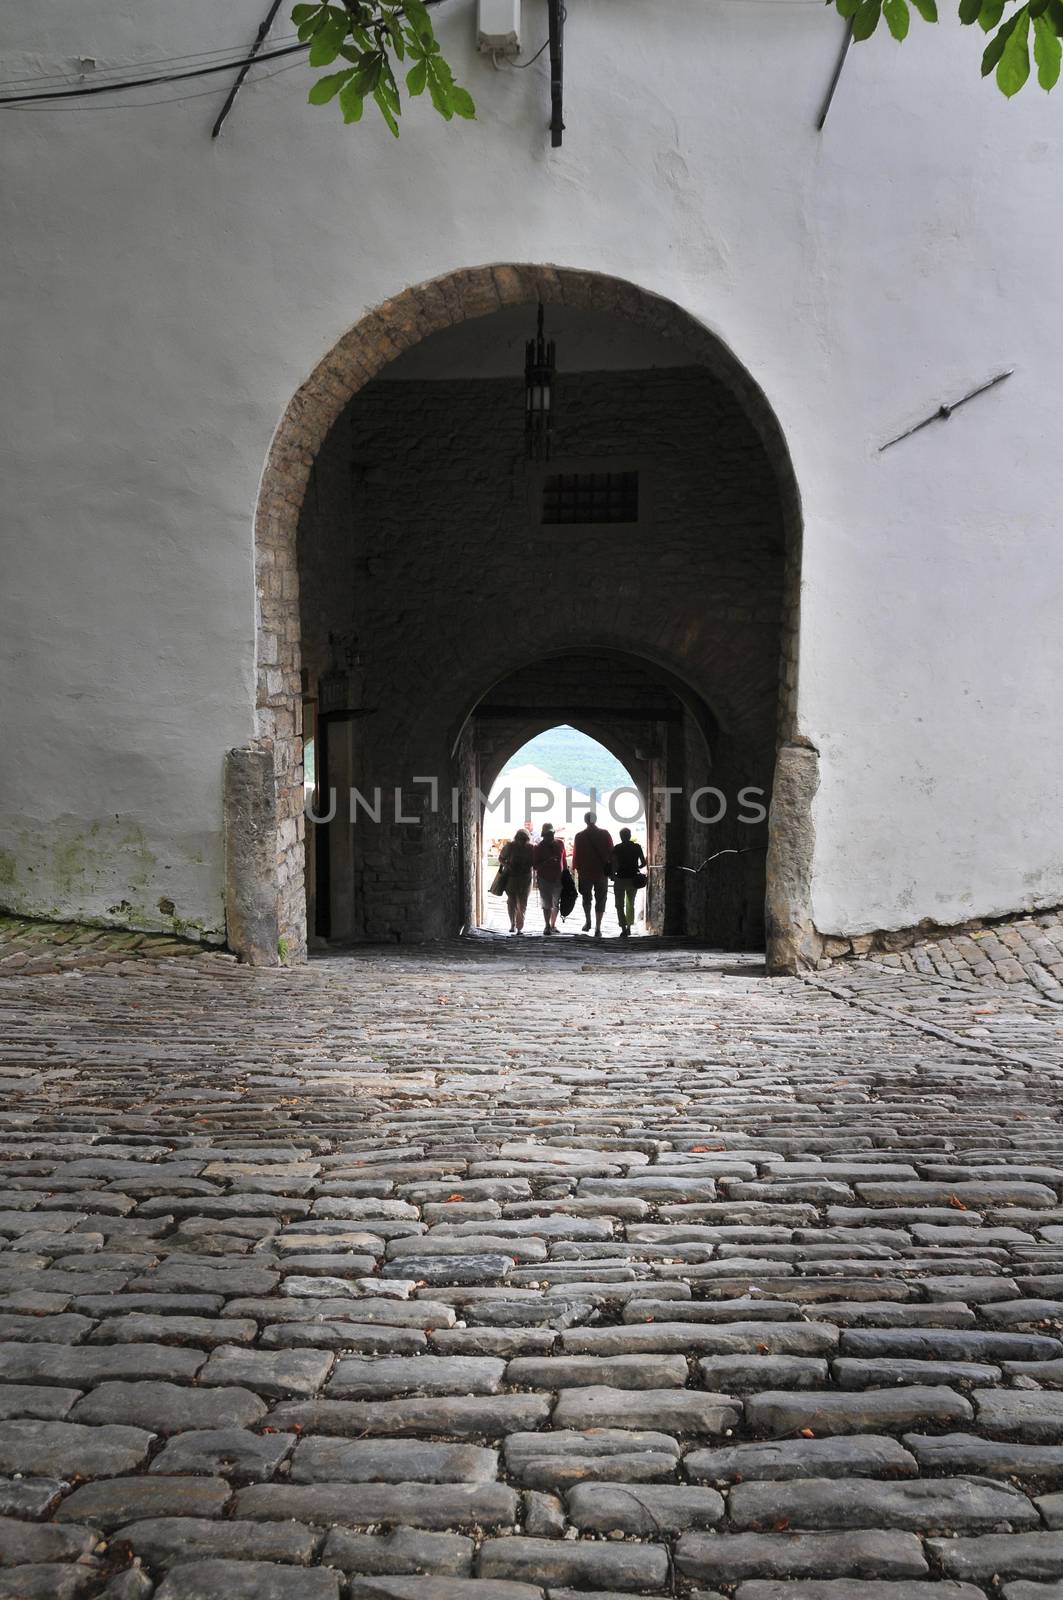 People passing through old city gate in Motovun, Croatia by asafaric